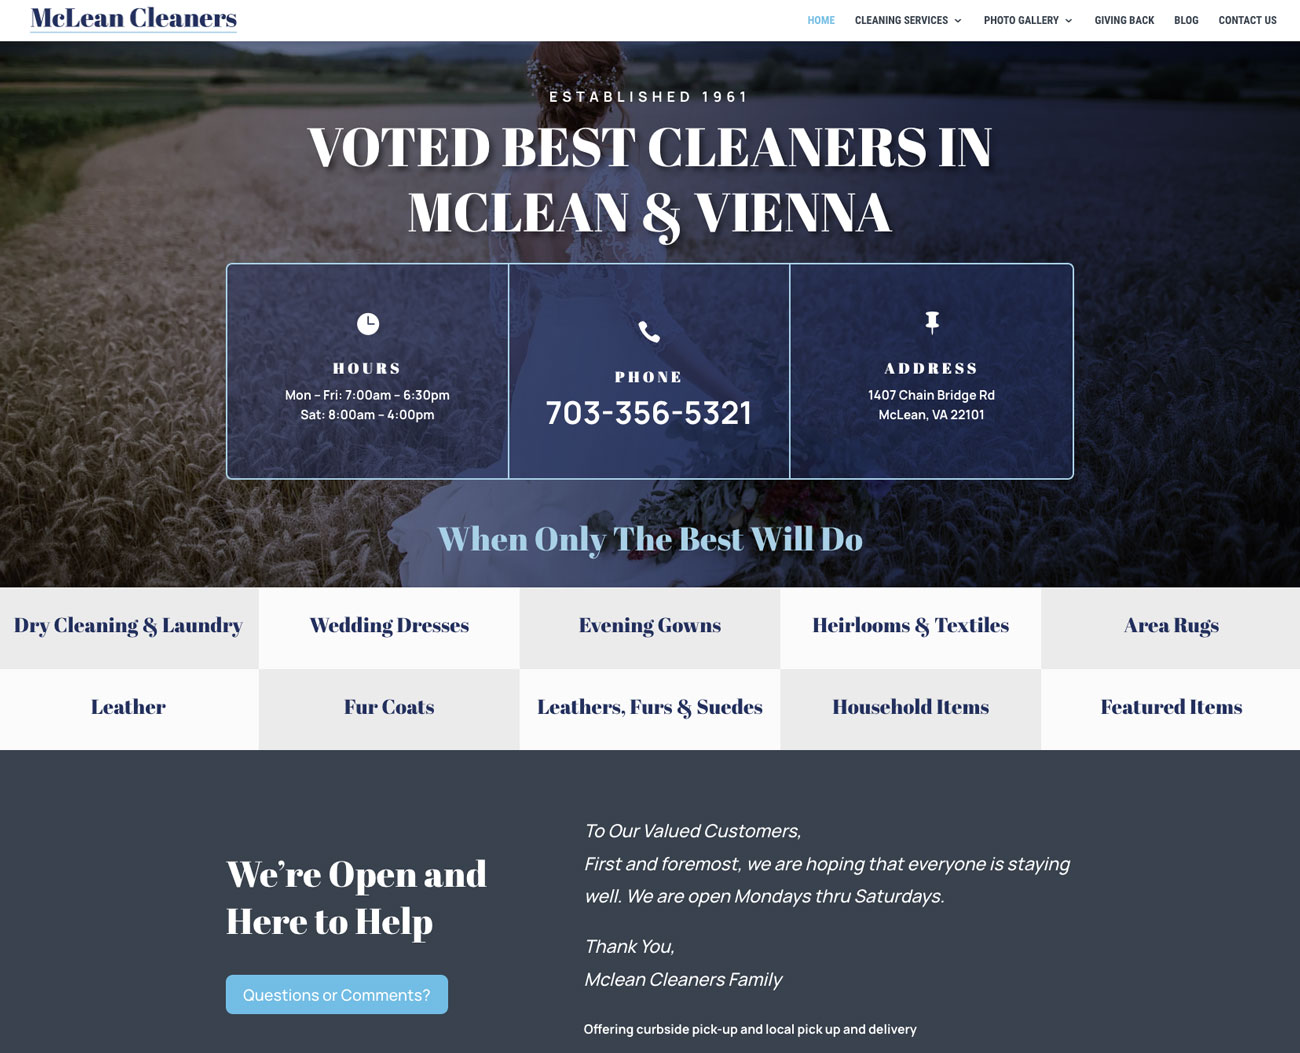 Mclean Cleaners website After Redesign